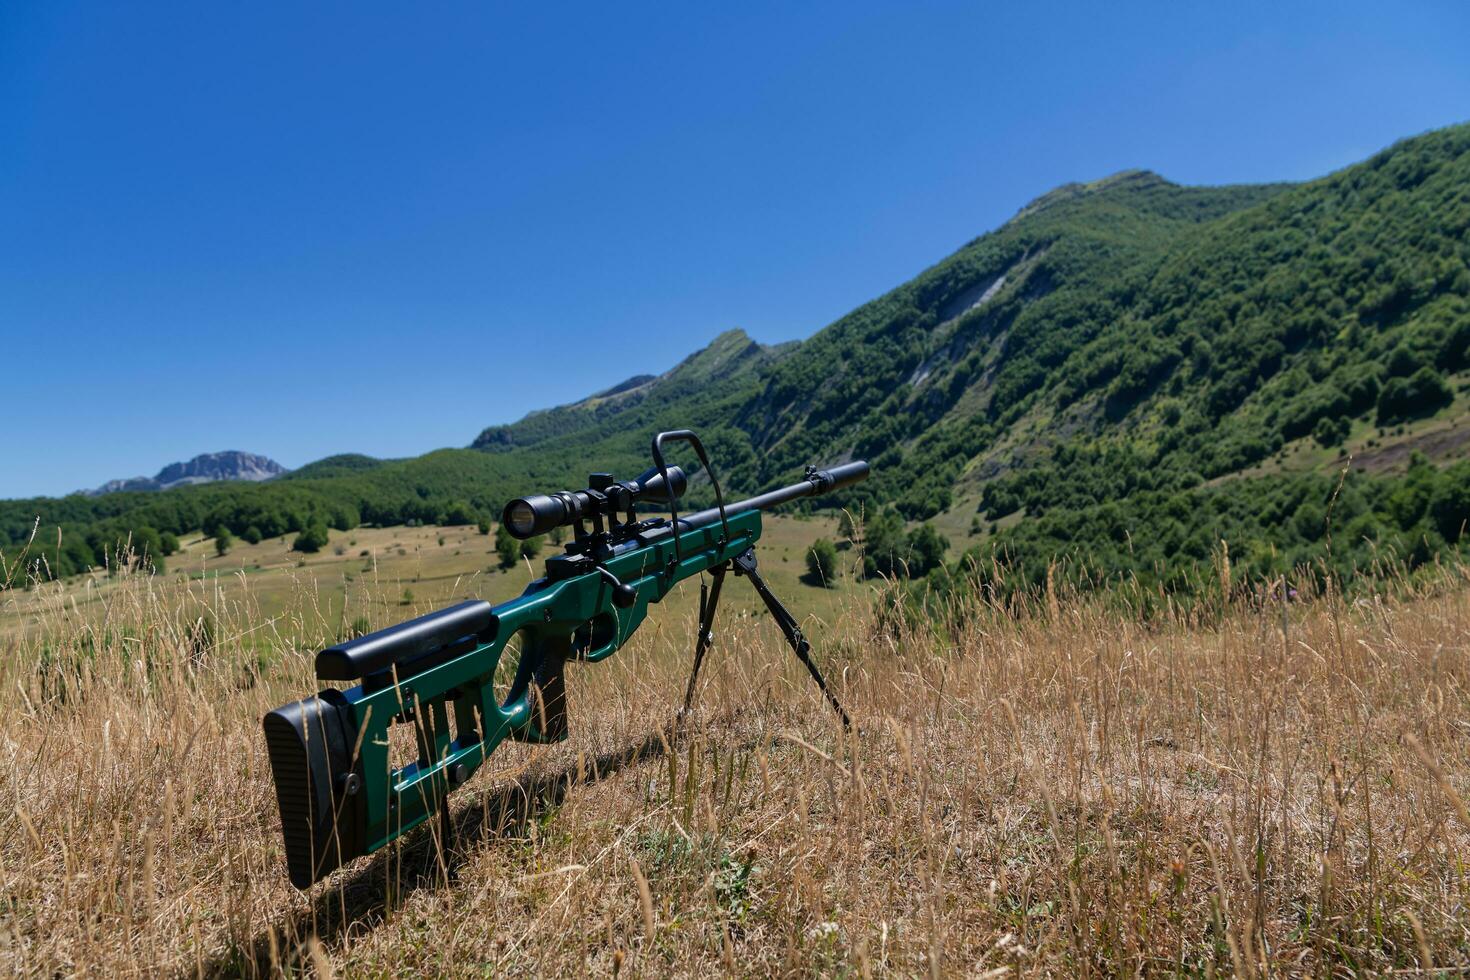 A green military sniper rifle with a scope for long distance tactical modern warfare in yellow grass blue sky photo